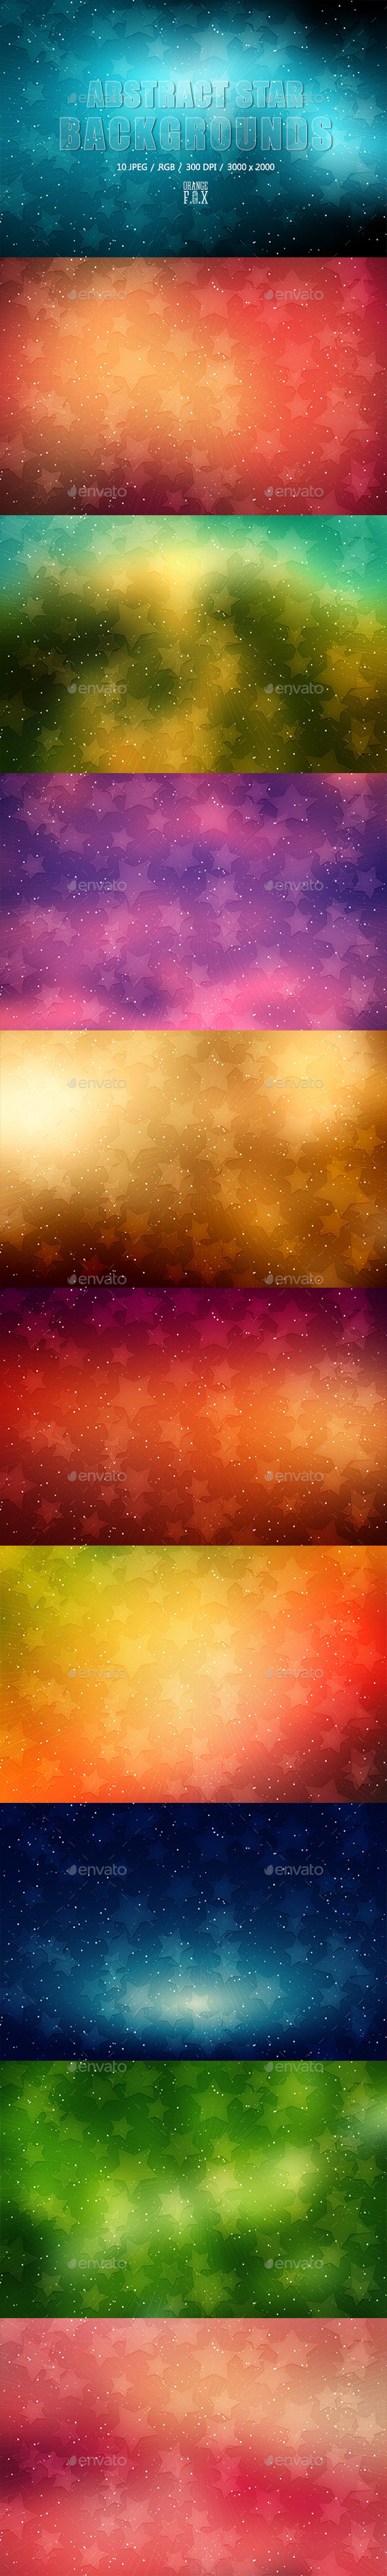 10 Abstract Star Backgrounds_preview.jpg